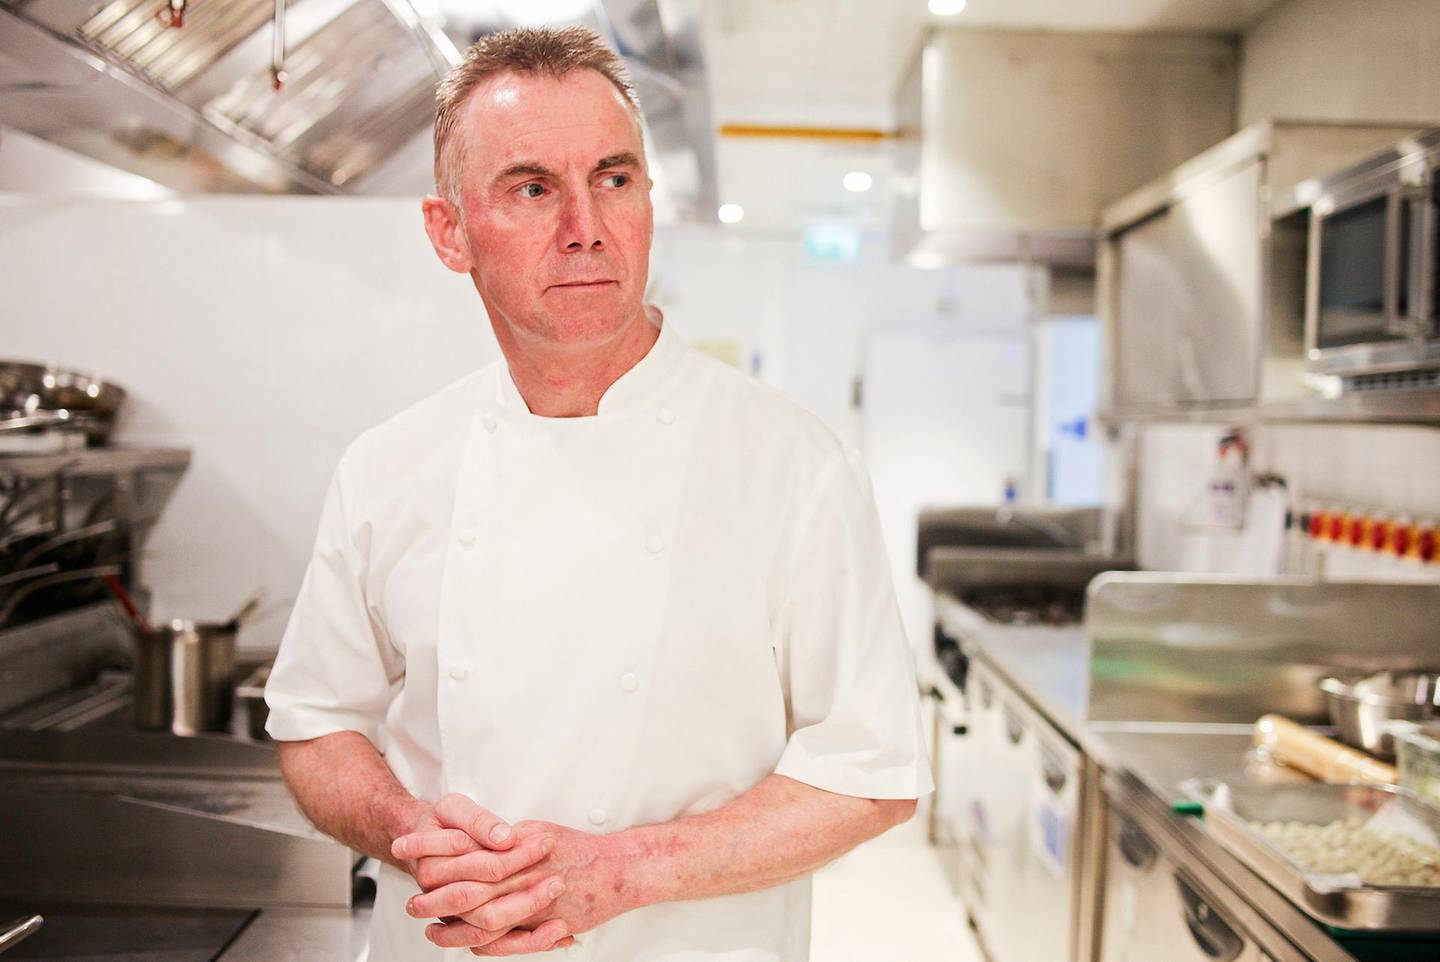 Dubai, UAE, September 30, 2014:Chef Gary Rhodes has opened a new restaurant inside of the Grovesnor House. Rhodes W1 is a welcomed addition to the crew of restaurants inside this hotel. Seen here is the Chef in his new domain. Lee Hoagland/The National